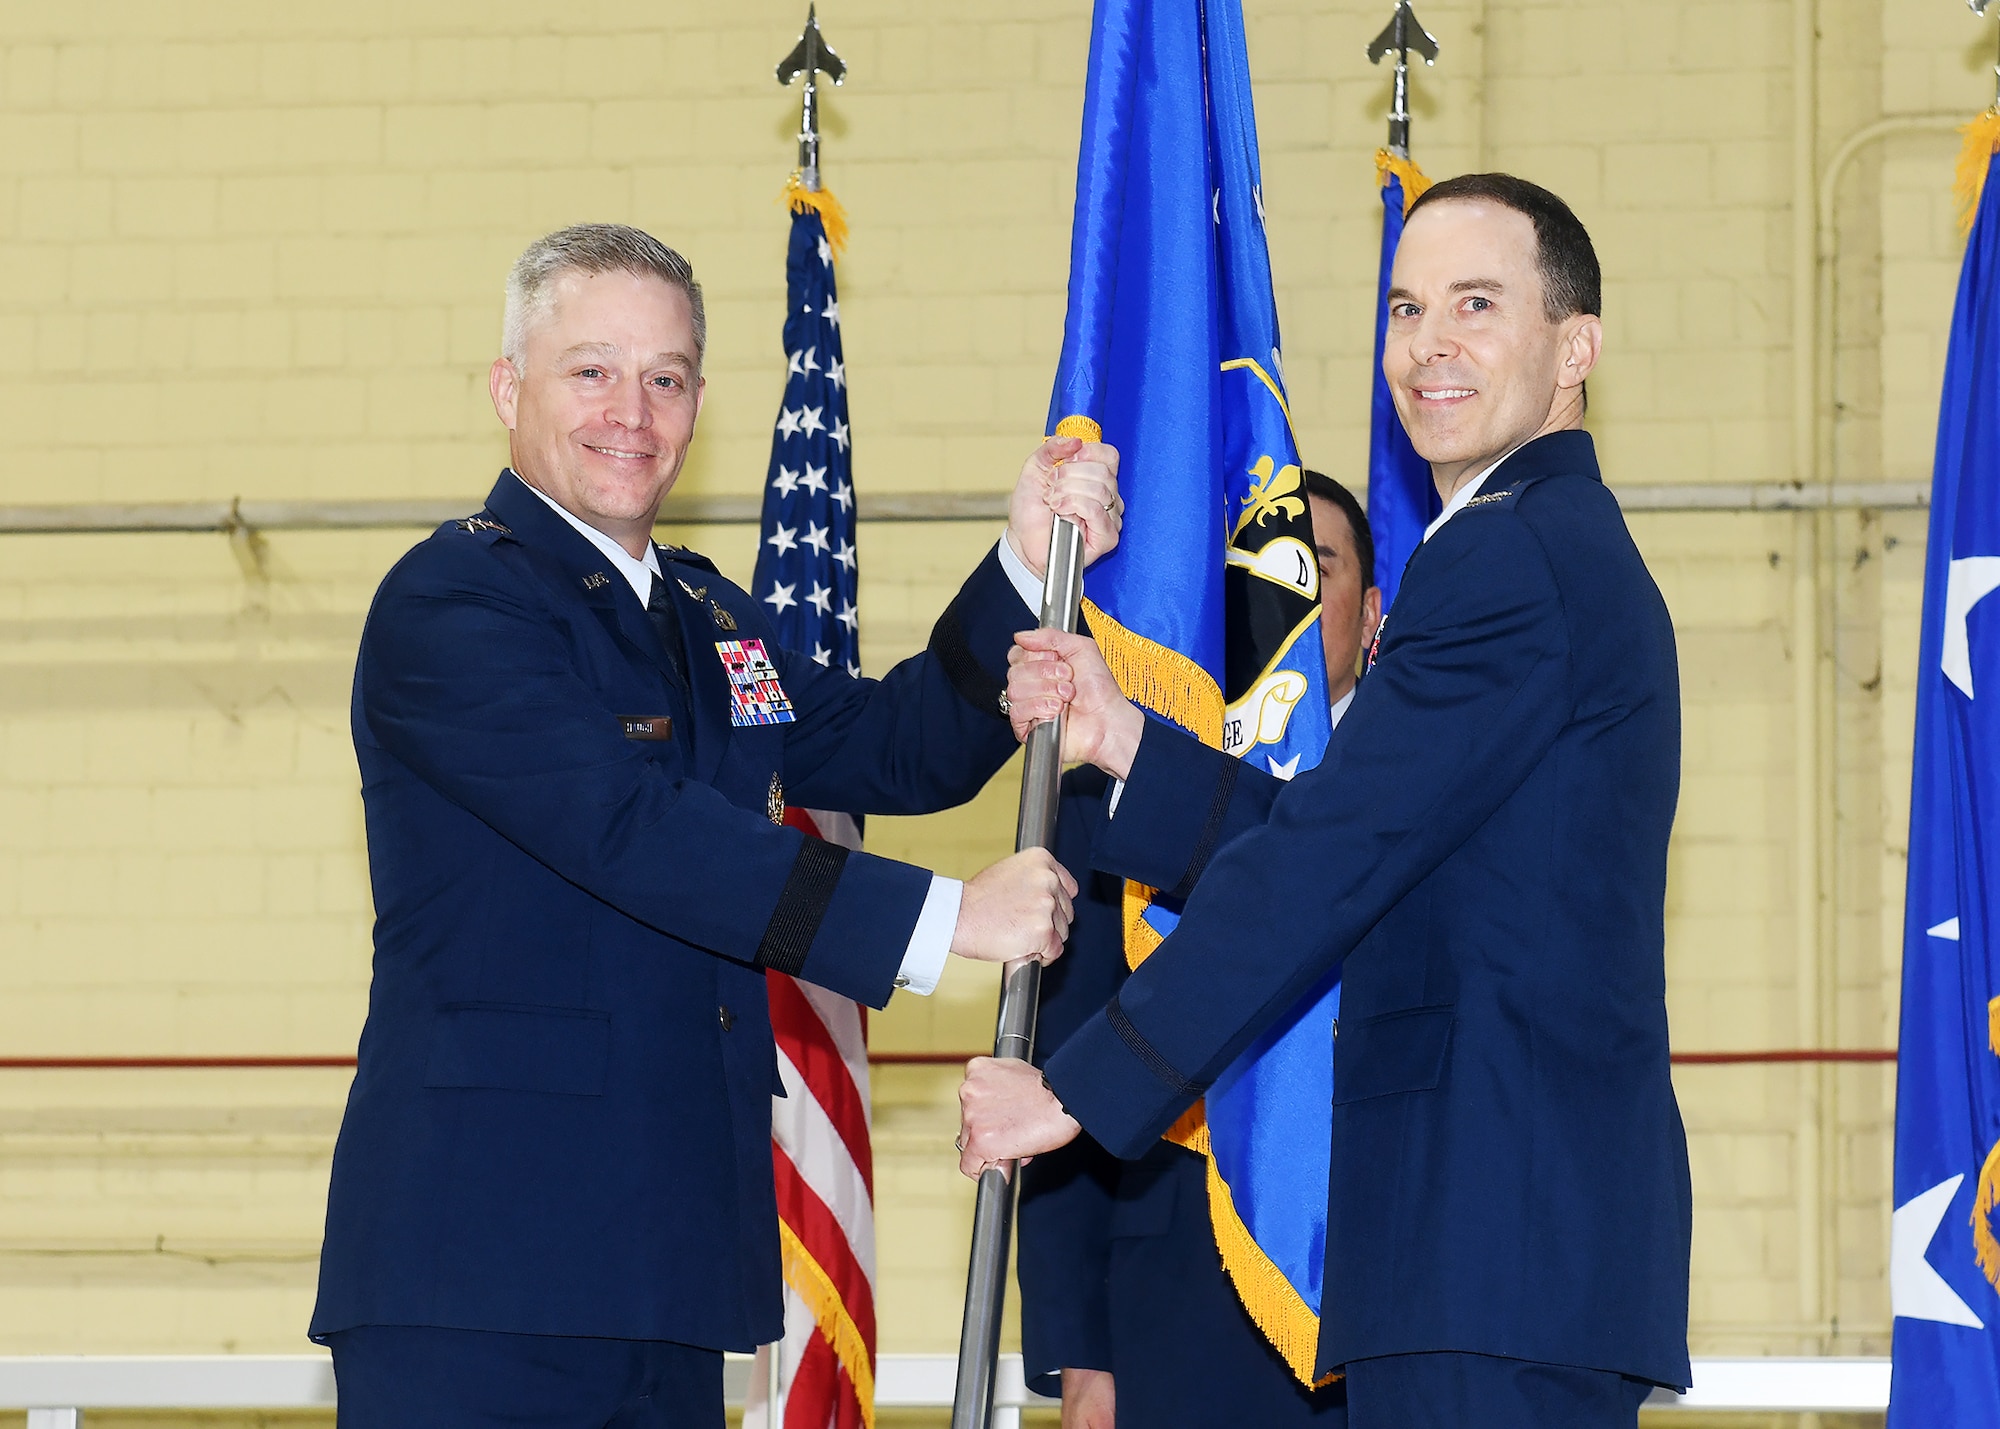 Lt. Gen. Timothy Haugh, Sixteenth Air Force (Air Forces Cyber) commander presents the guidon for the 557th Weather Wing to Col. Bradley Stebbins during a change of command ceremony on May 24, 2022 in hangar six on Offutt Air Force Base.